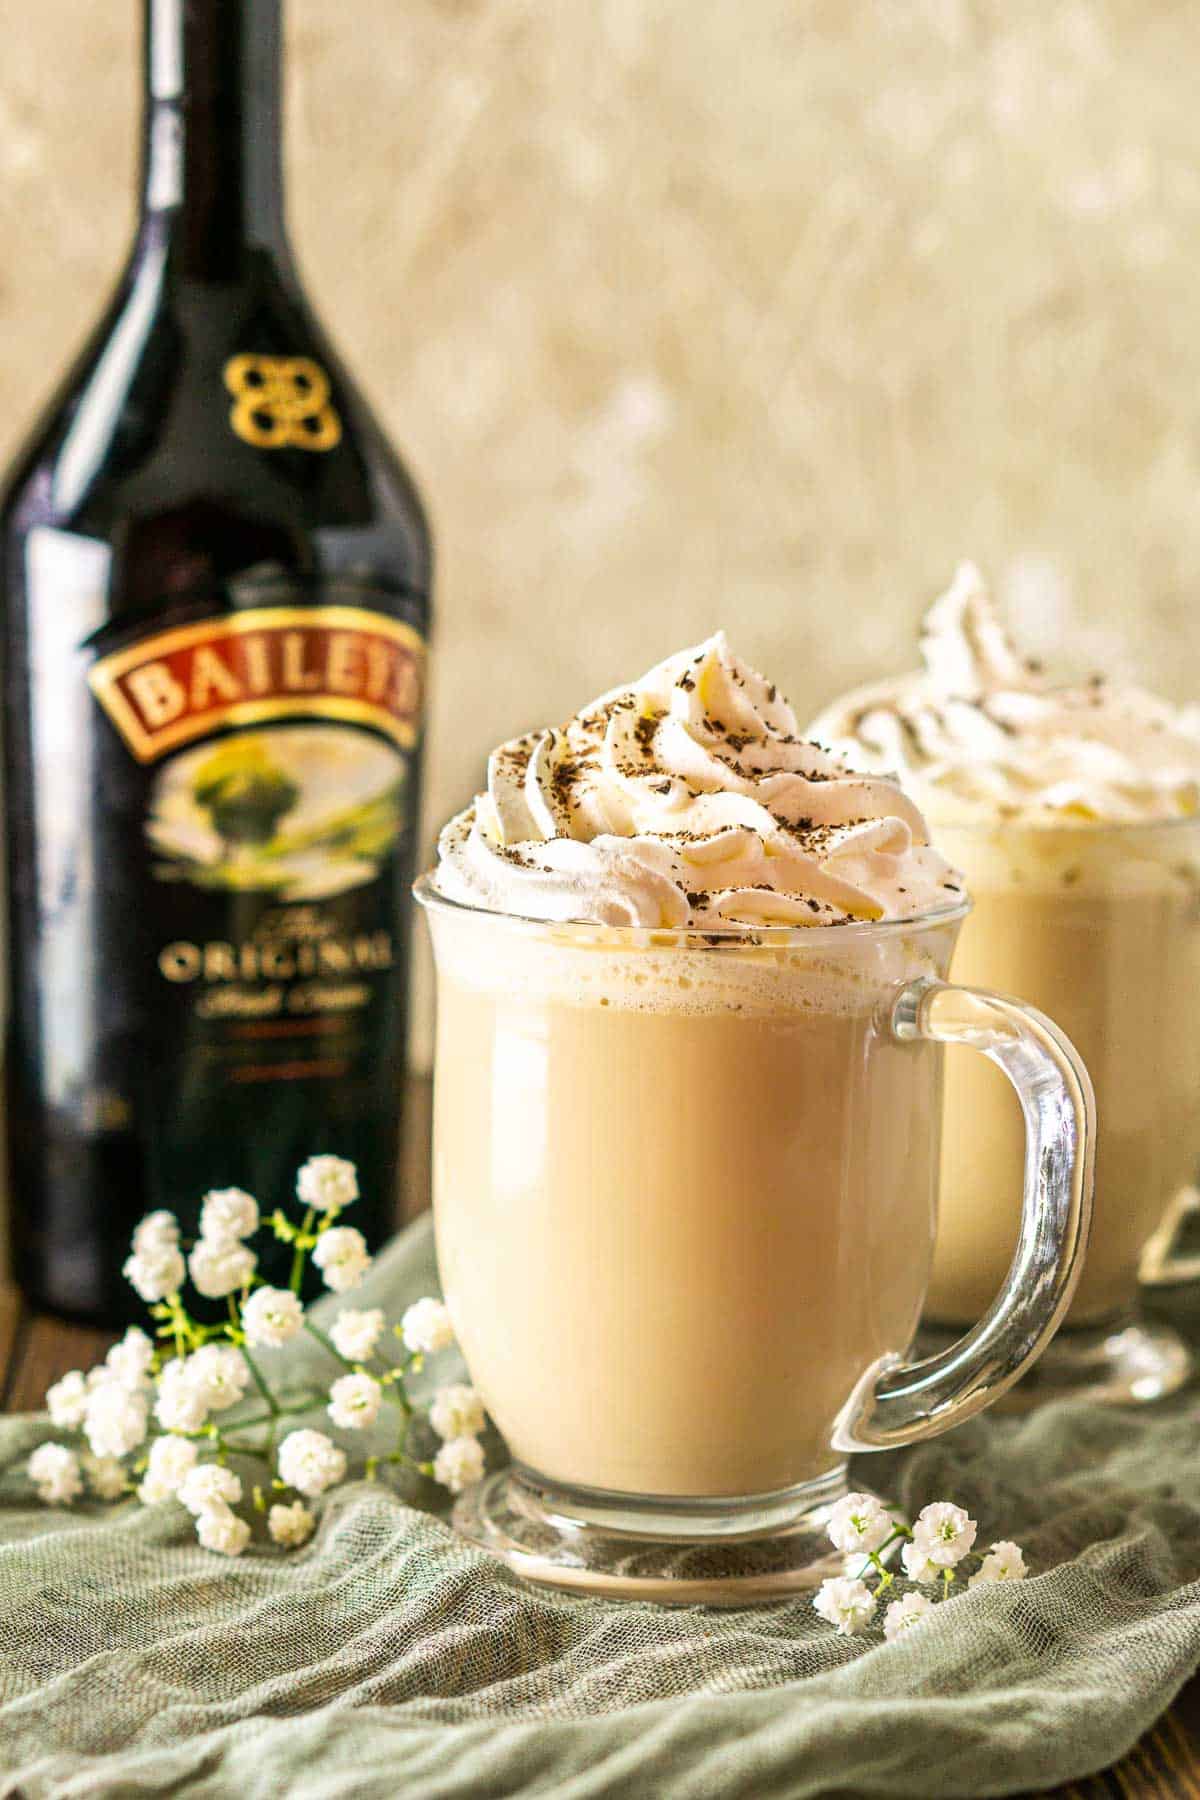 A close-up of the Baileys latte with flower and Irish cream in the background.